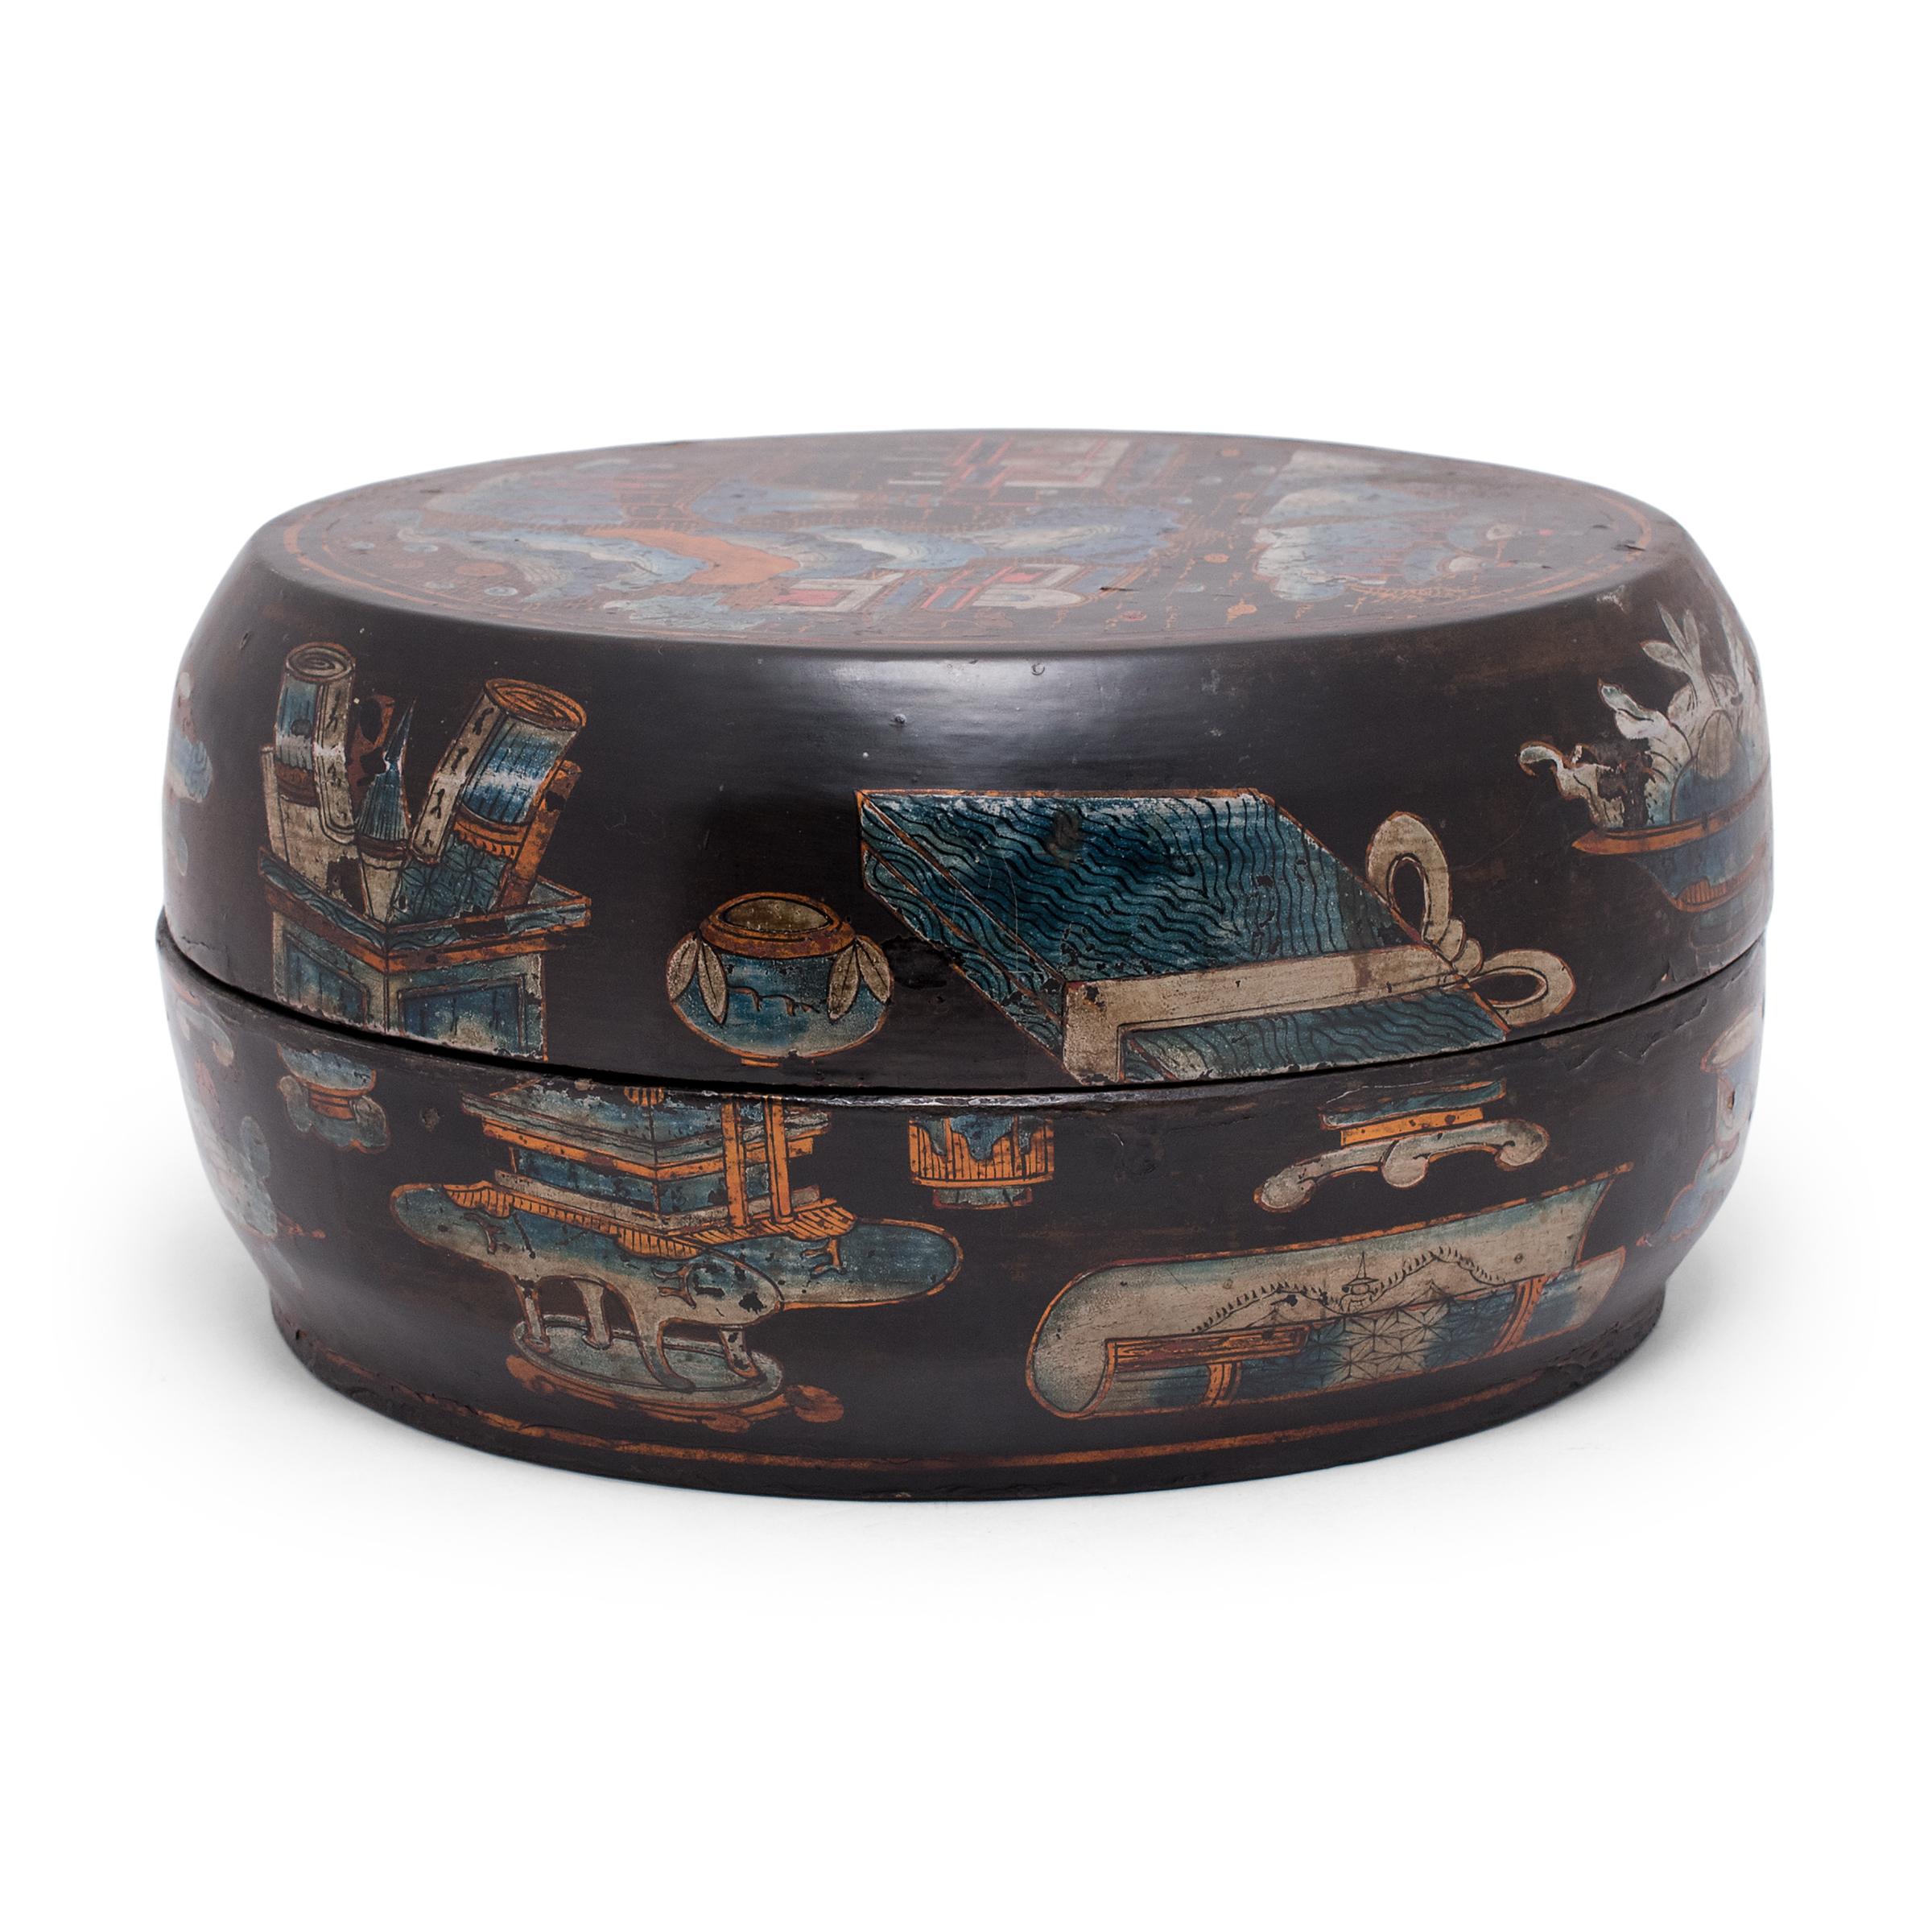 Qing Chinese Lacquered Presentation Box, c. 1850